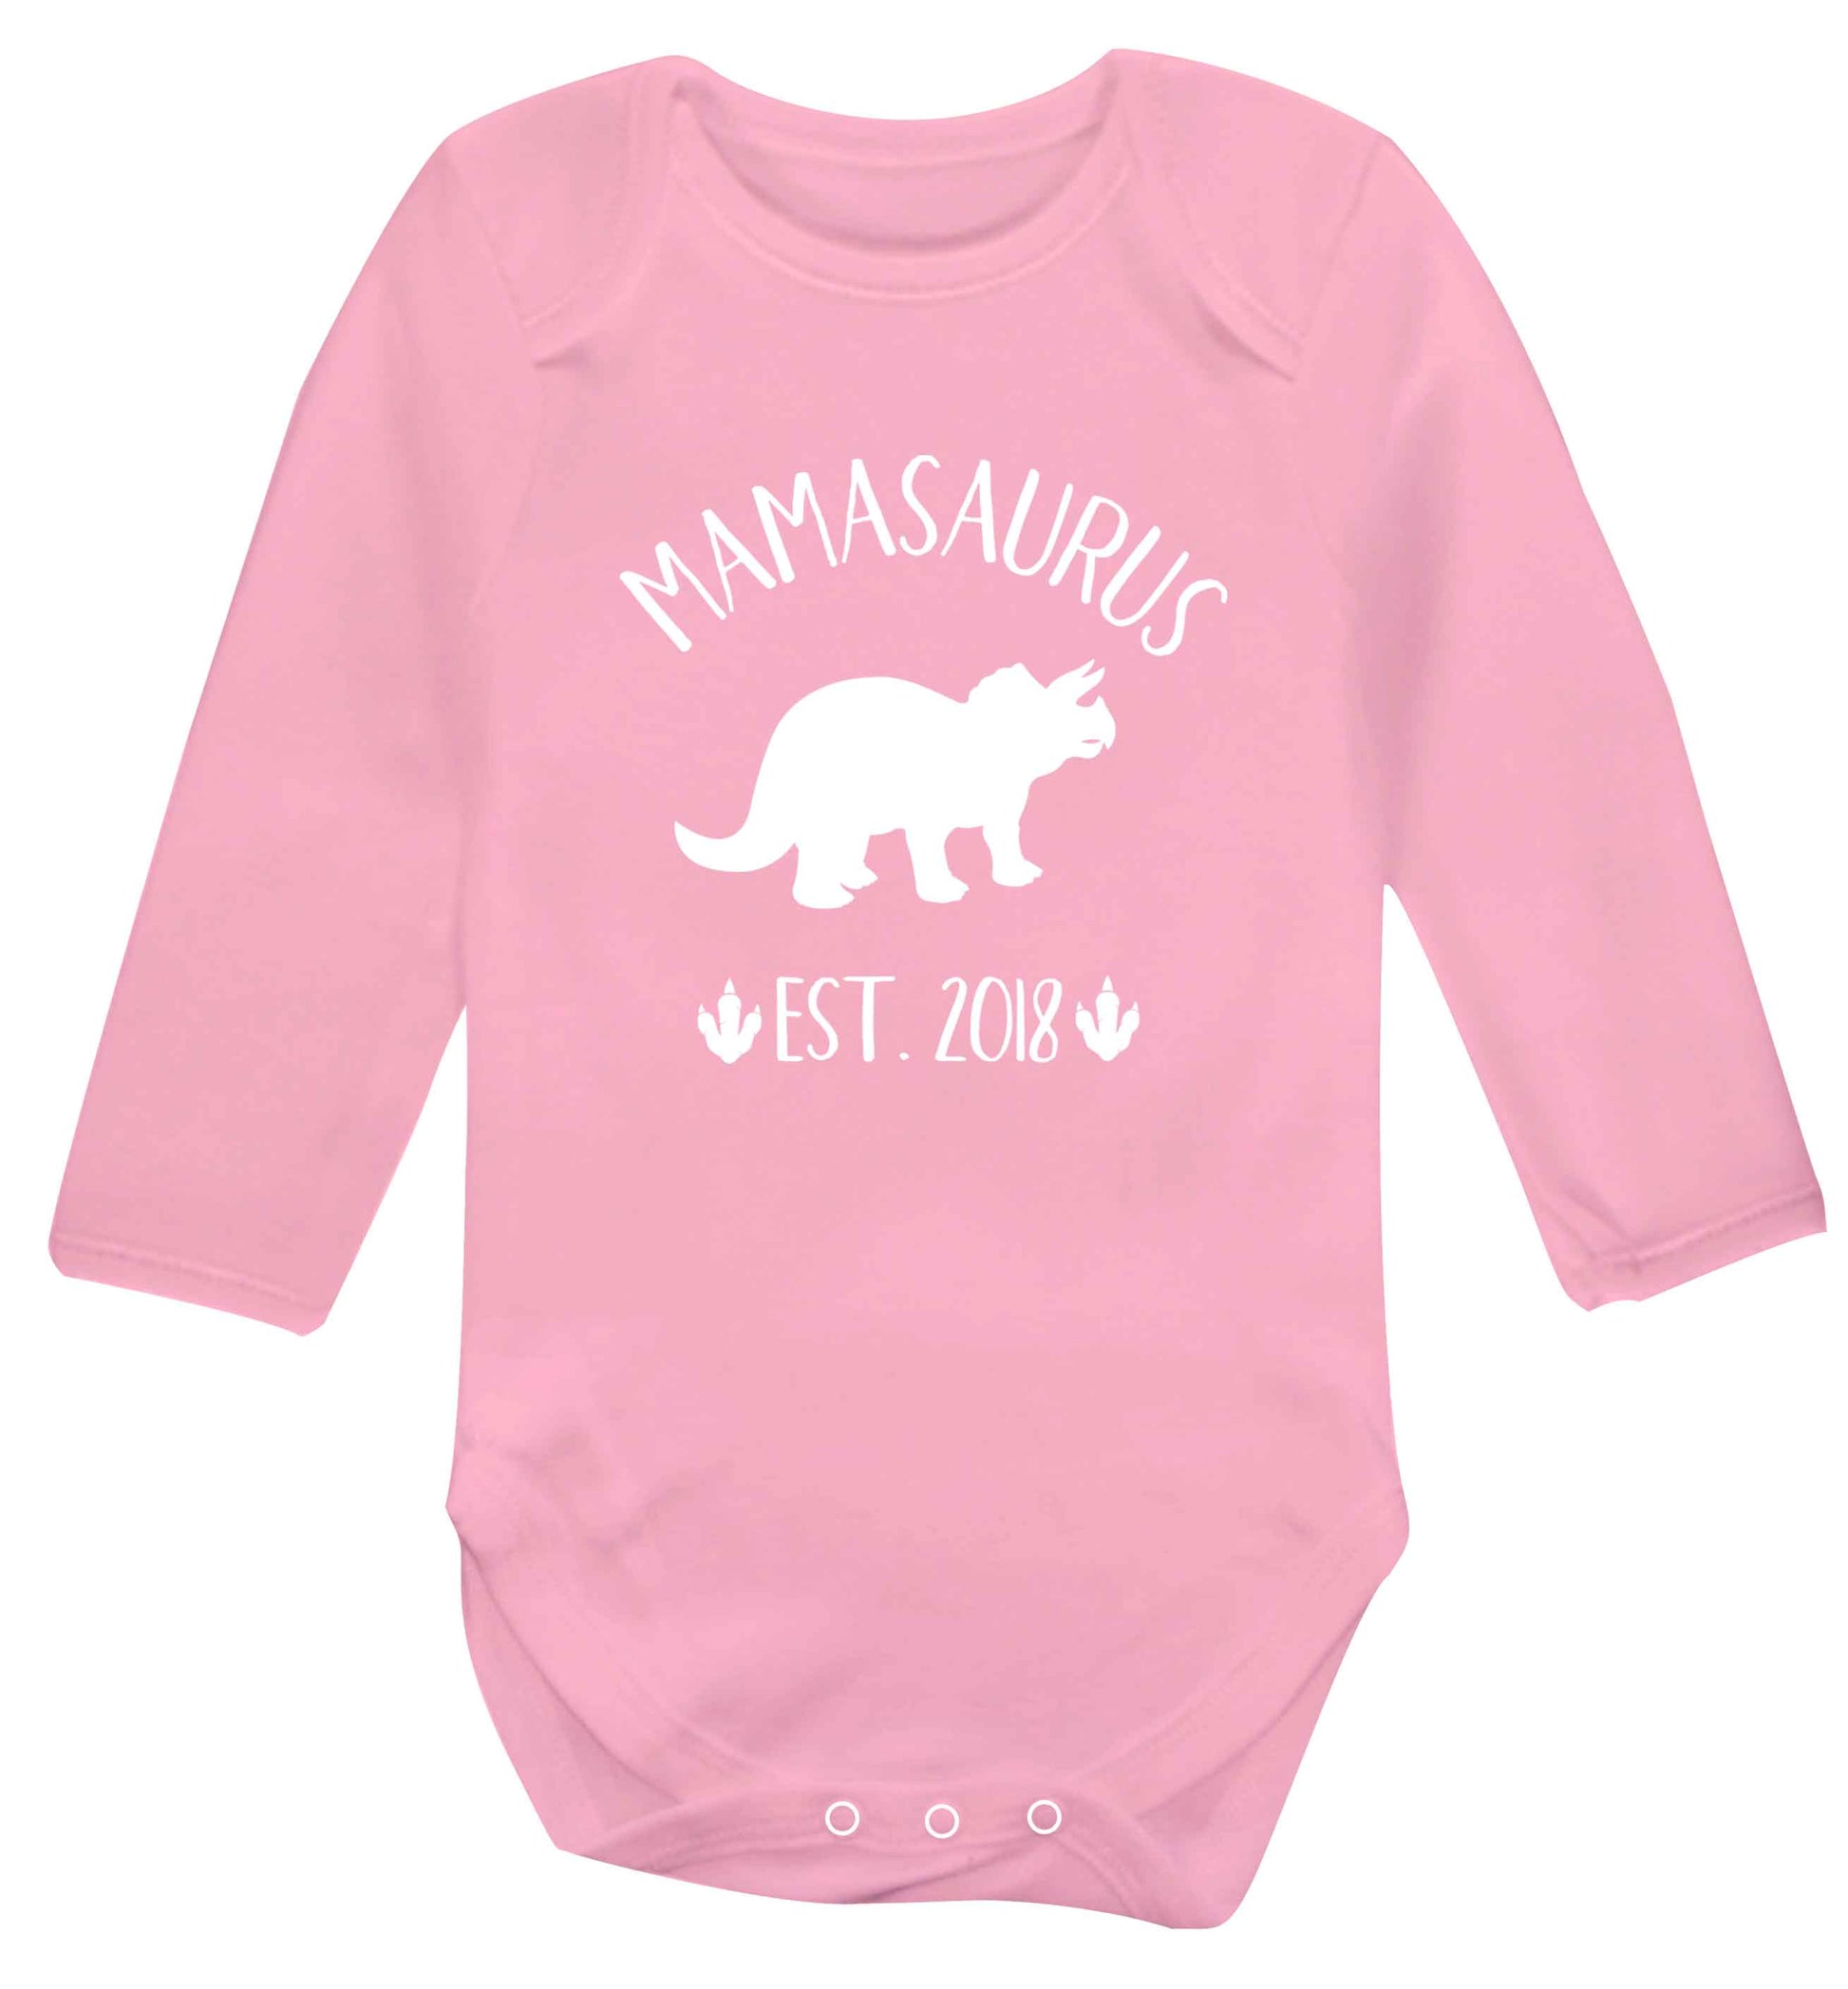 Personalised mamasaurus date baby vest long sleeved pale pink 6-12 months